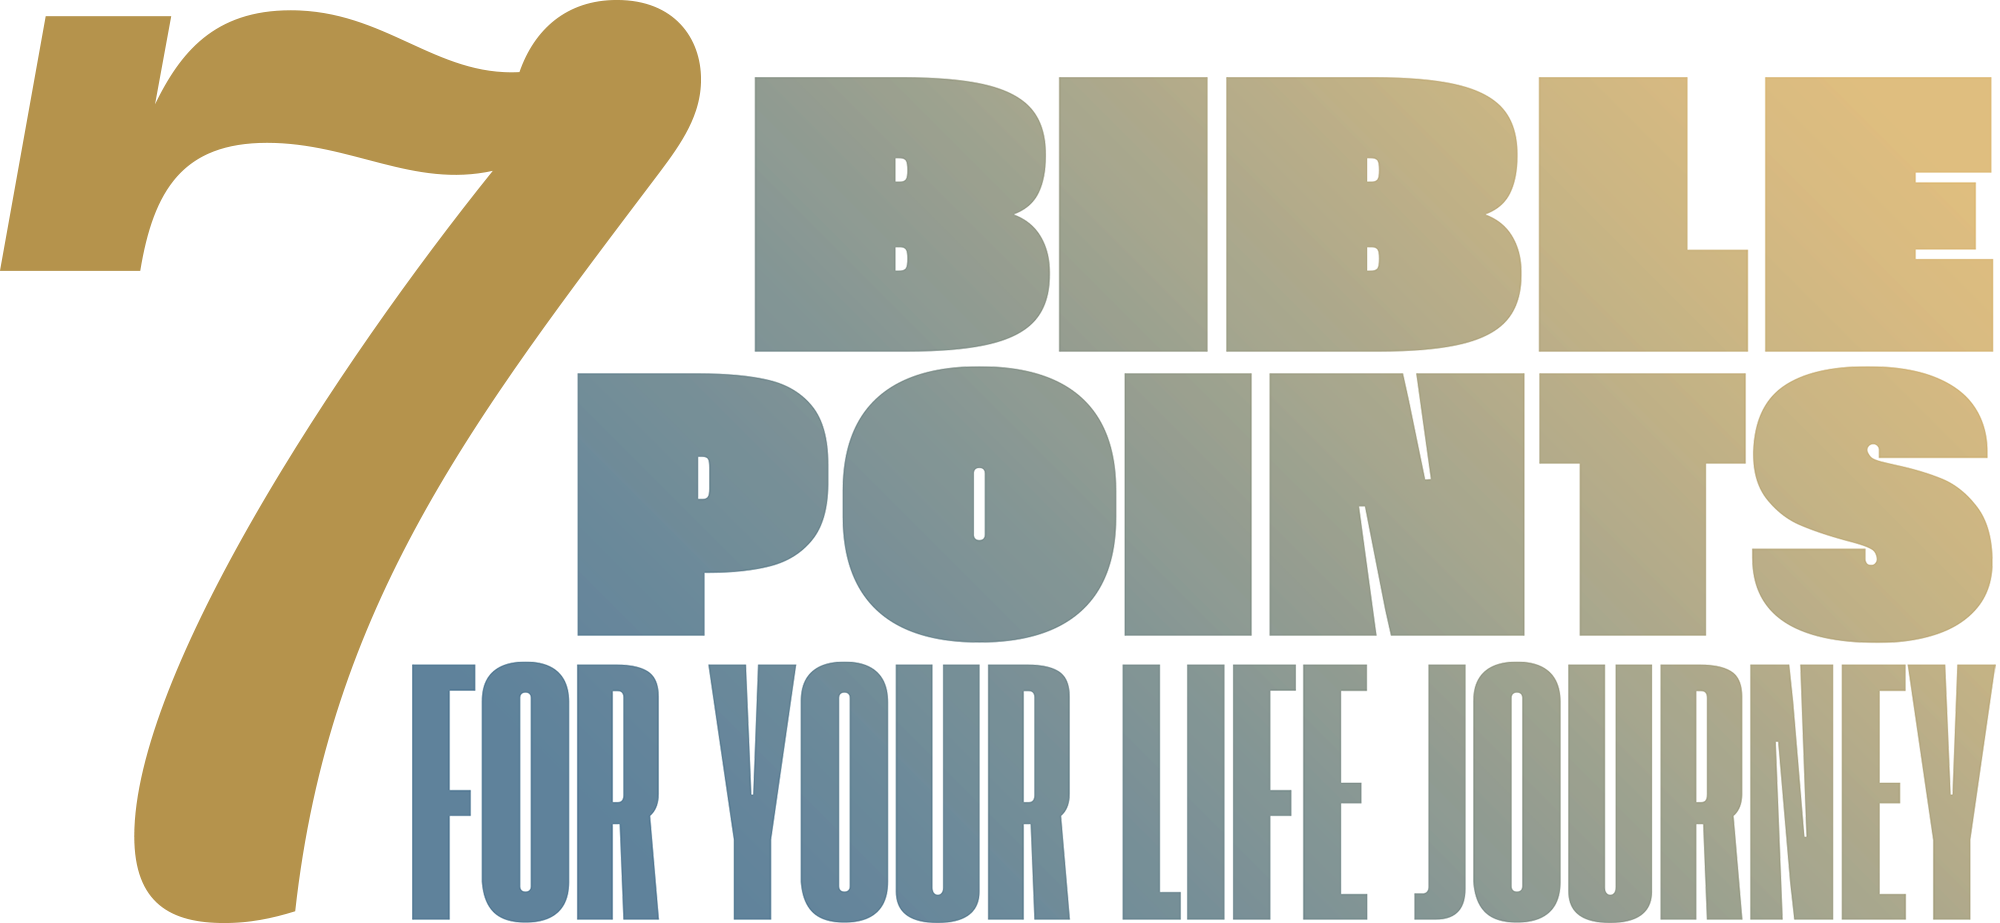 7 Bible Points for Your Life Journey